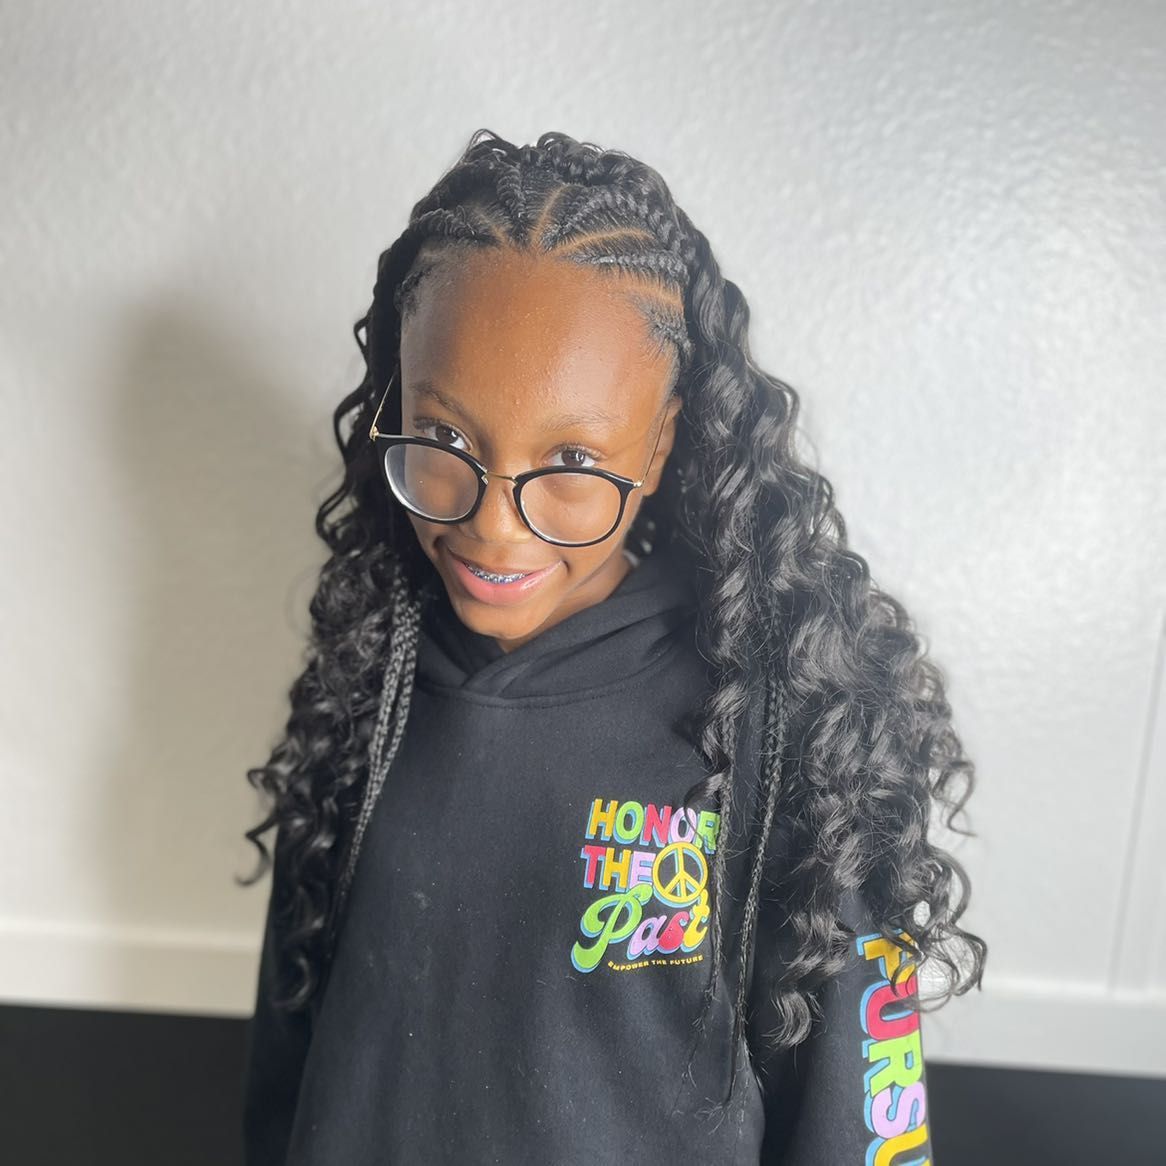 Ages 6-11 crochet in back/feednbraids in front portfolio